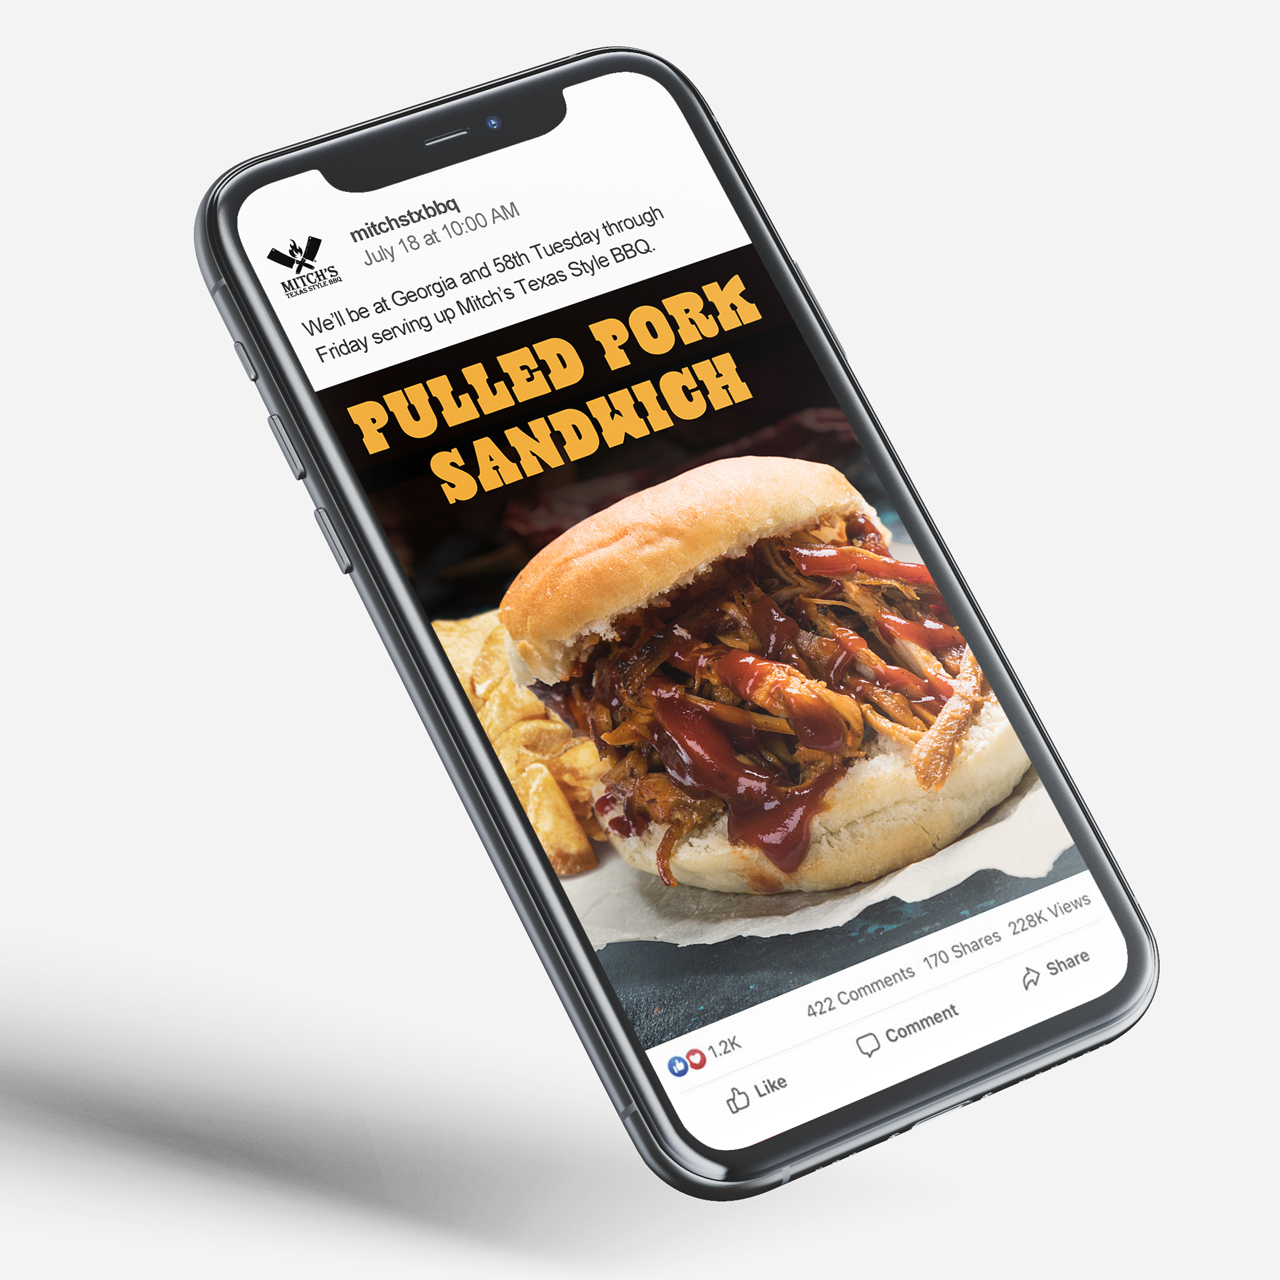 An image of a mobile phone with a social media post promoting Mitch's Texas Style BBQ's pulled pork sandwich